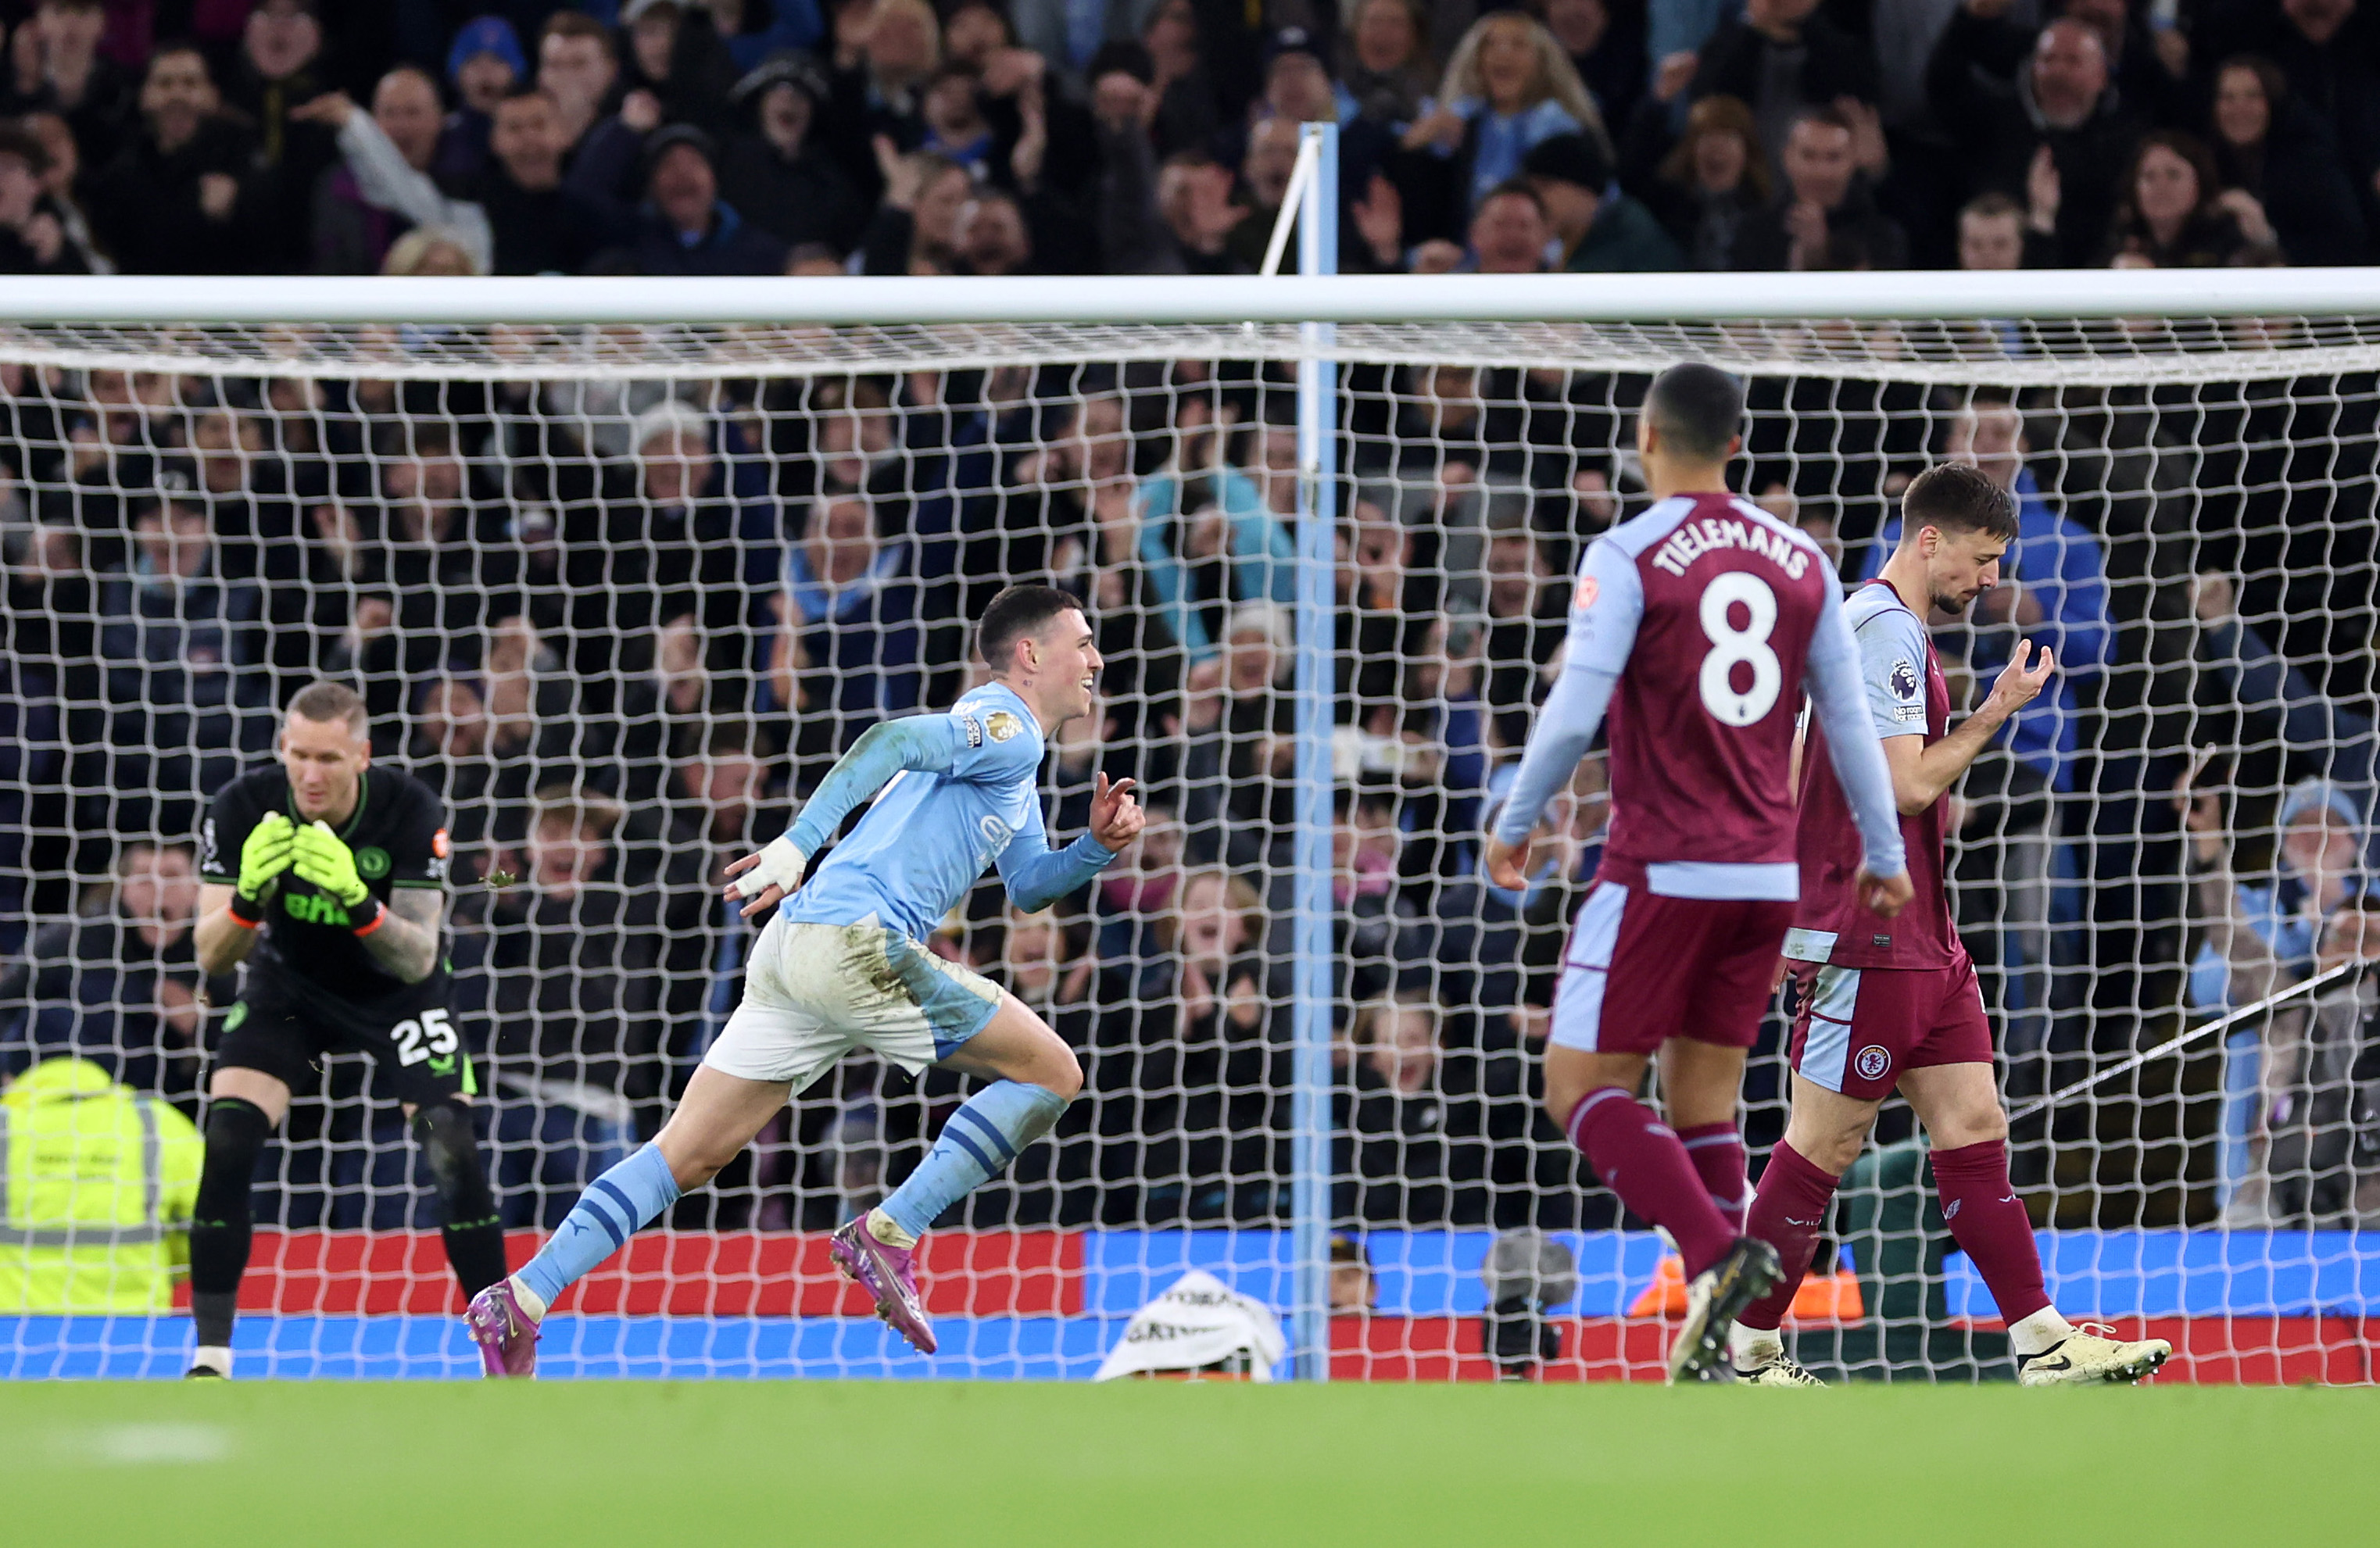 Phil Foden bagged a hat-trick for Man City